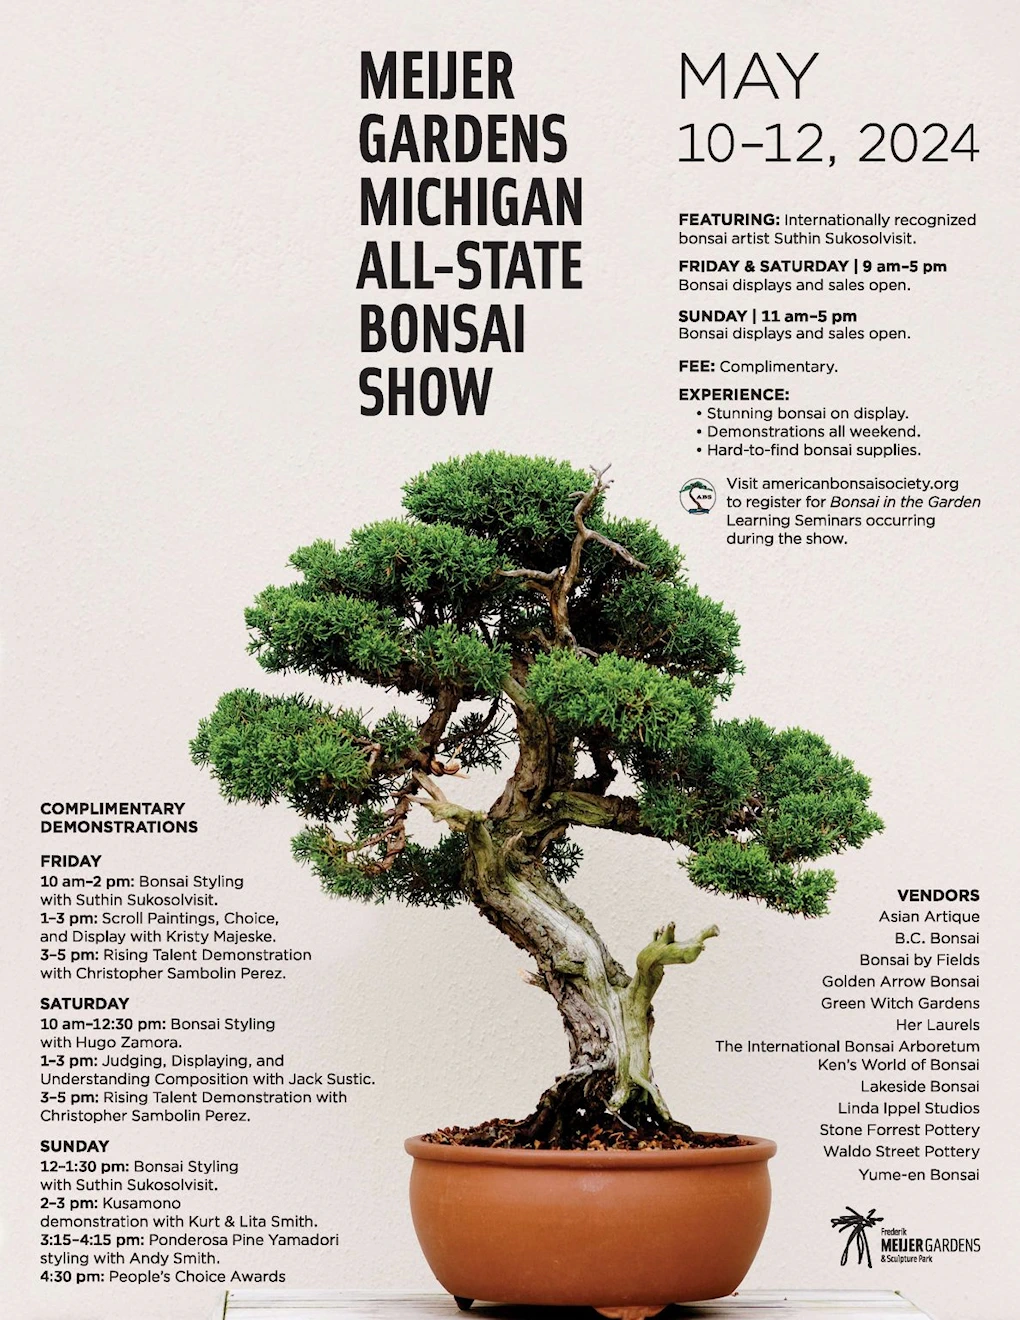 2024 Meijer Gardens Michigan All-State Bonsai Show (Bonsai Requires Involvement Who Engage in its Cultivation, Shaping, & Care..)